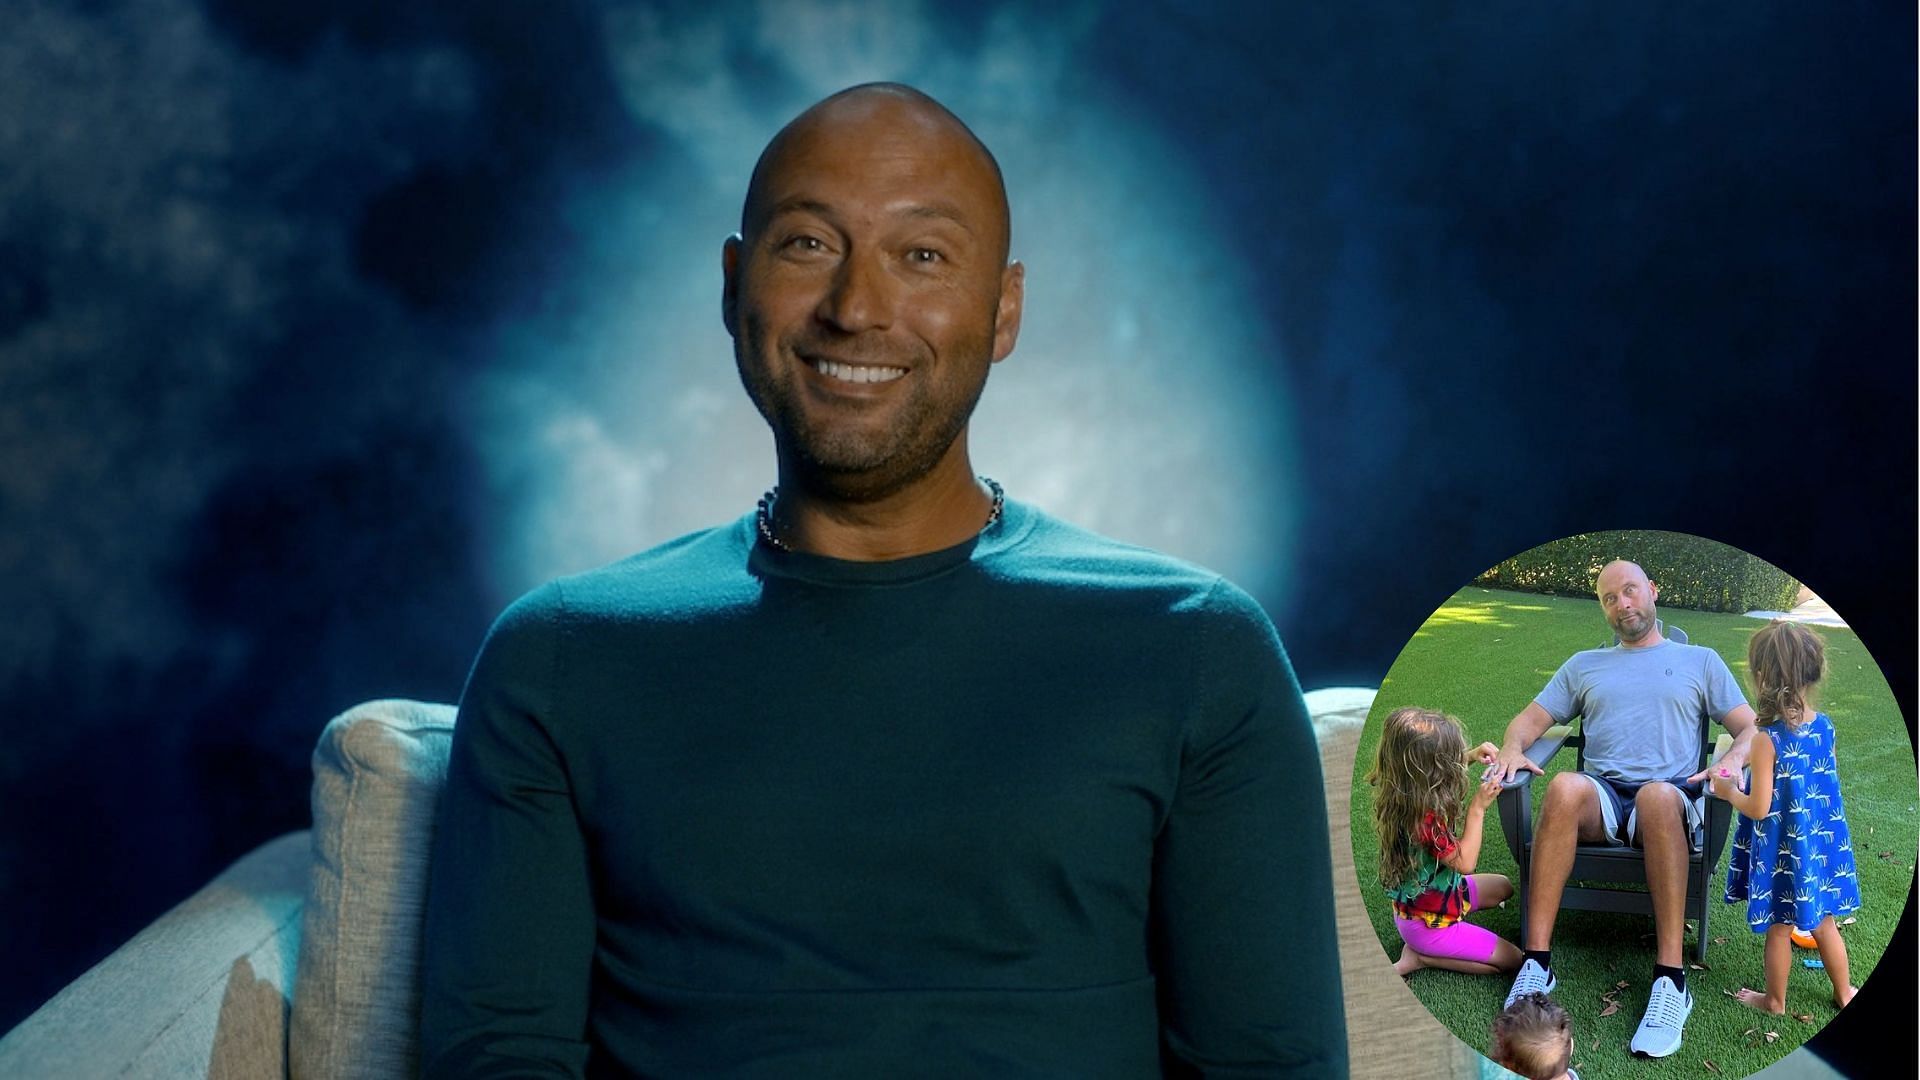 Derek Jeter gets manicure from his daughters